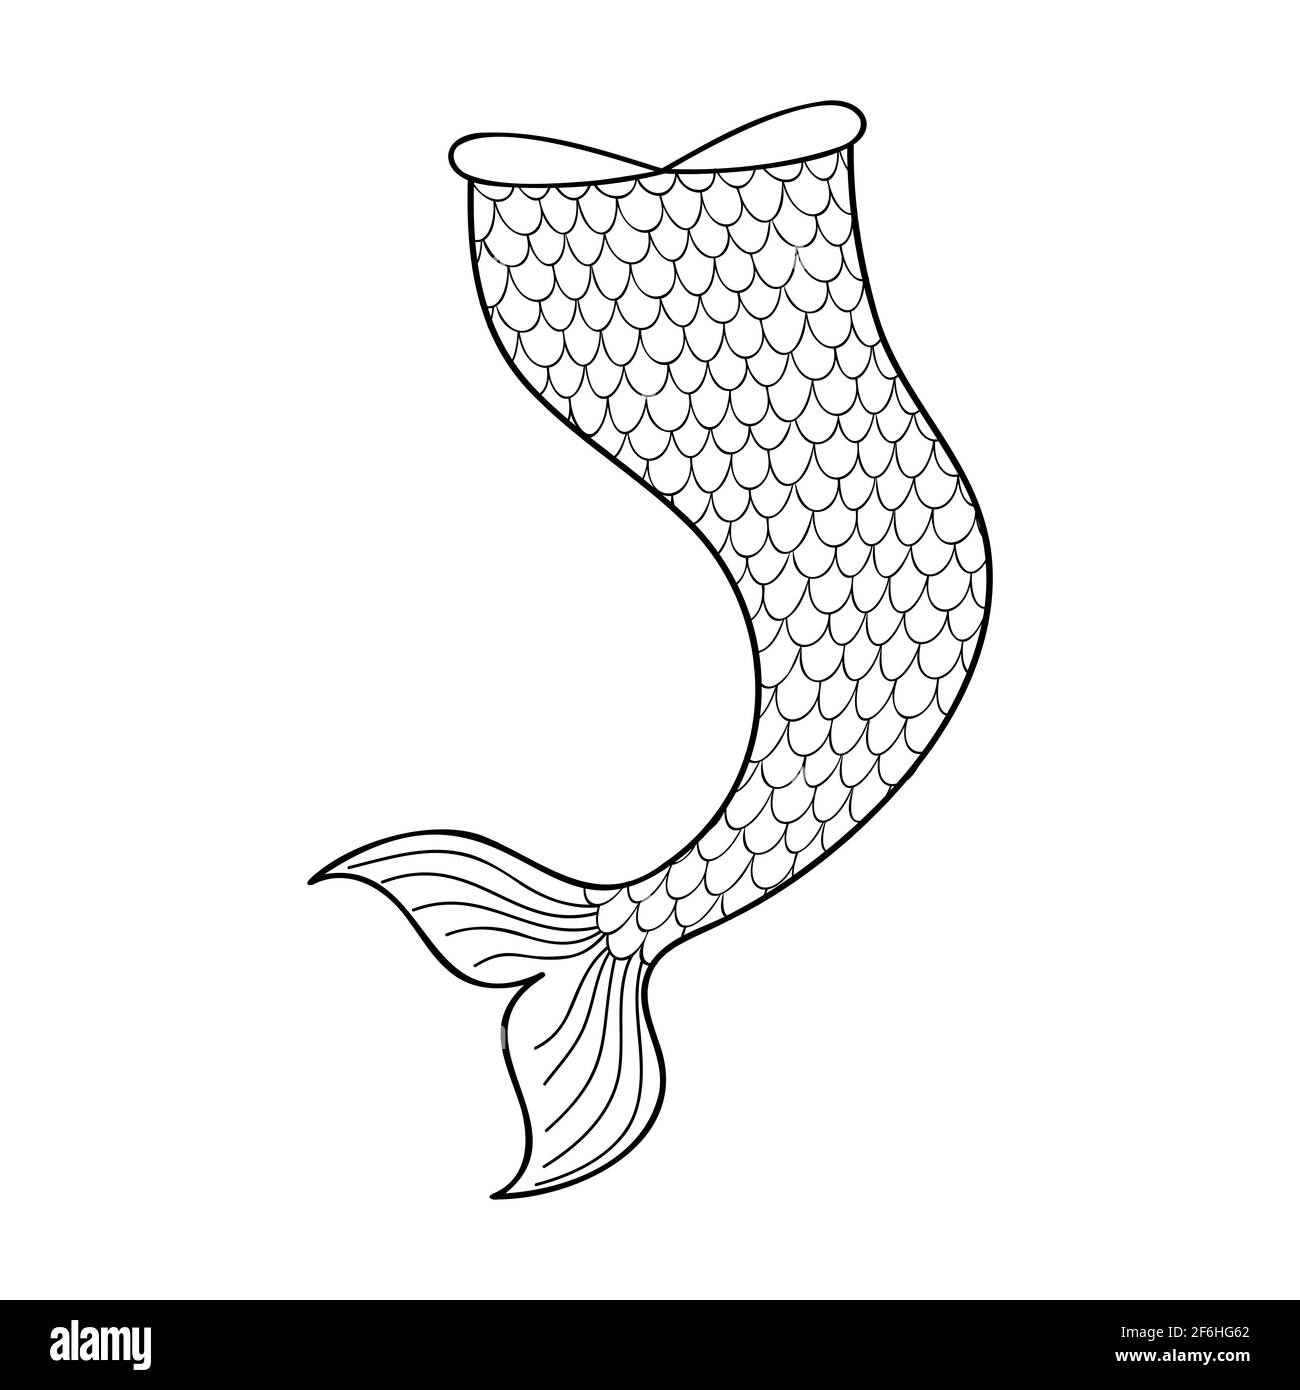 Hand drawn mermaid tail isolated on white background. Doodle element for sea party, greeting or invitation card. Design for clothing print. Outline vector illustration. Stock Vector